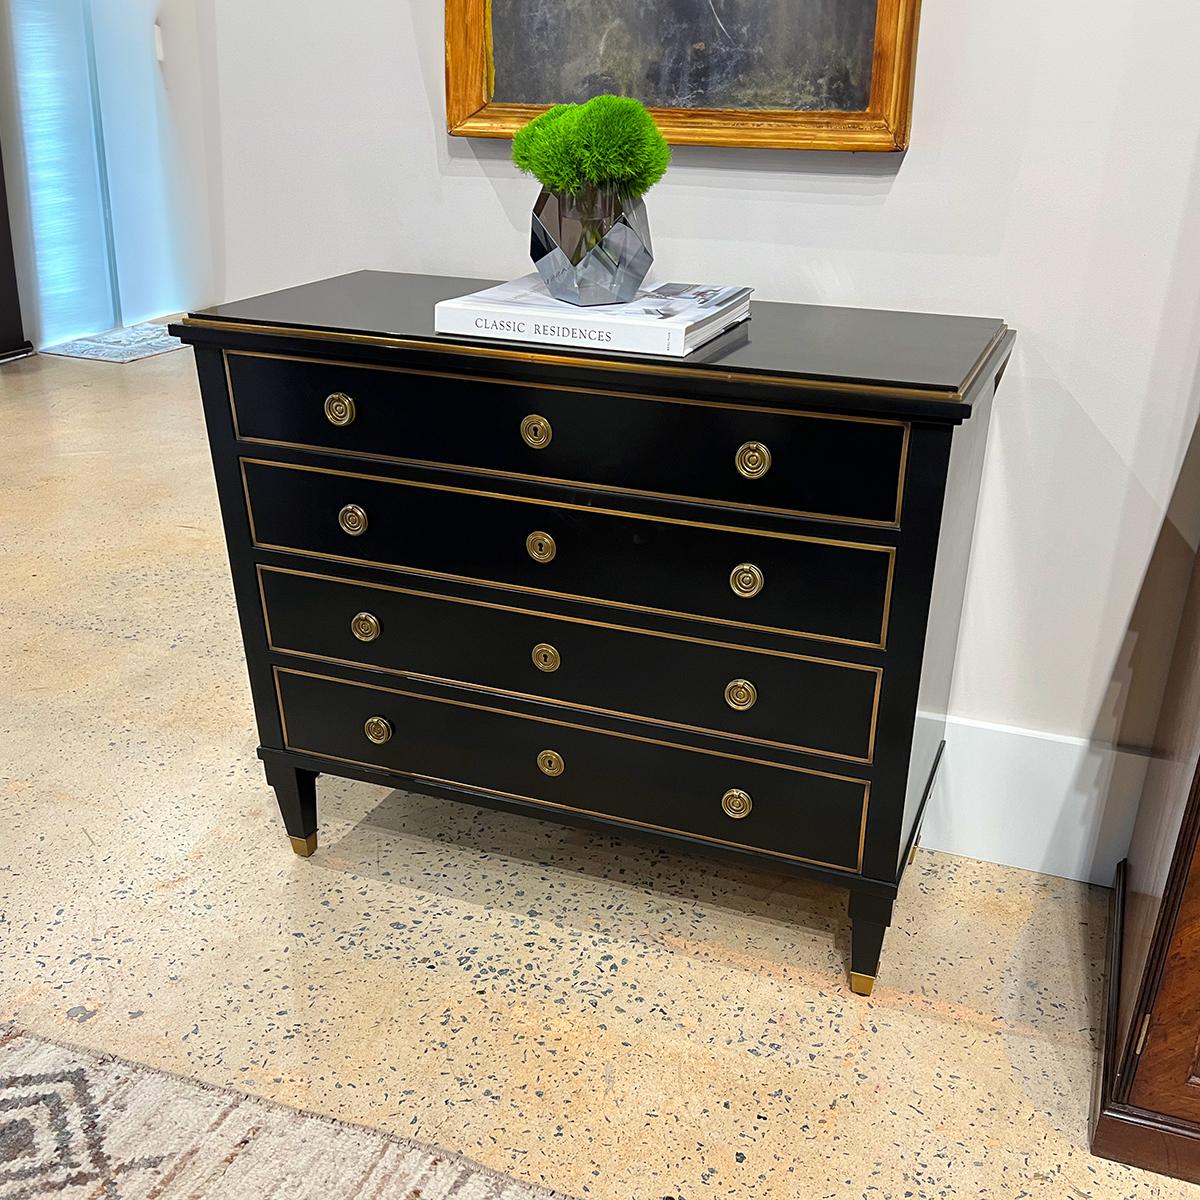 The four-drawer chest is beautifully lacquered and ebonized with a high sheen. The rectangular top and drawer fronts are framed with solid brass trim and the drawers have traditional-style brass ring pull handles. 

Raised on square tapered feet